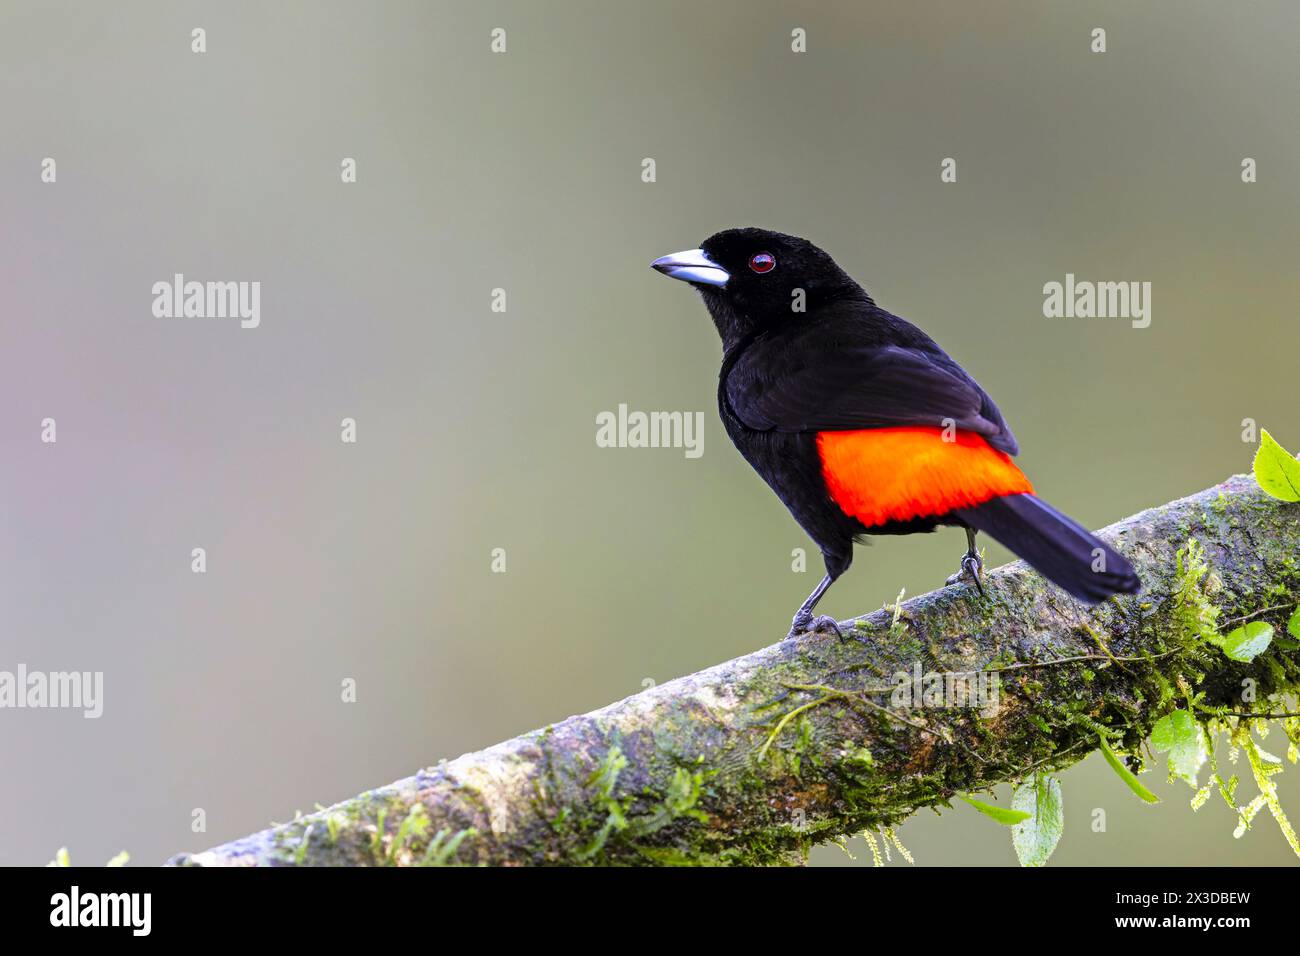 Scarlet-rumped tanager, Passerini's Tanager (Ramphocelus passerinii), male msitting on a branch in the rainforest, Costa Rica, Boca Tapada Stock Photo